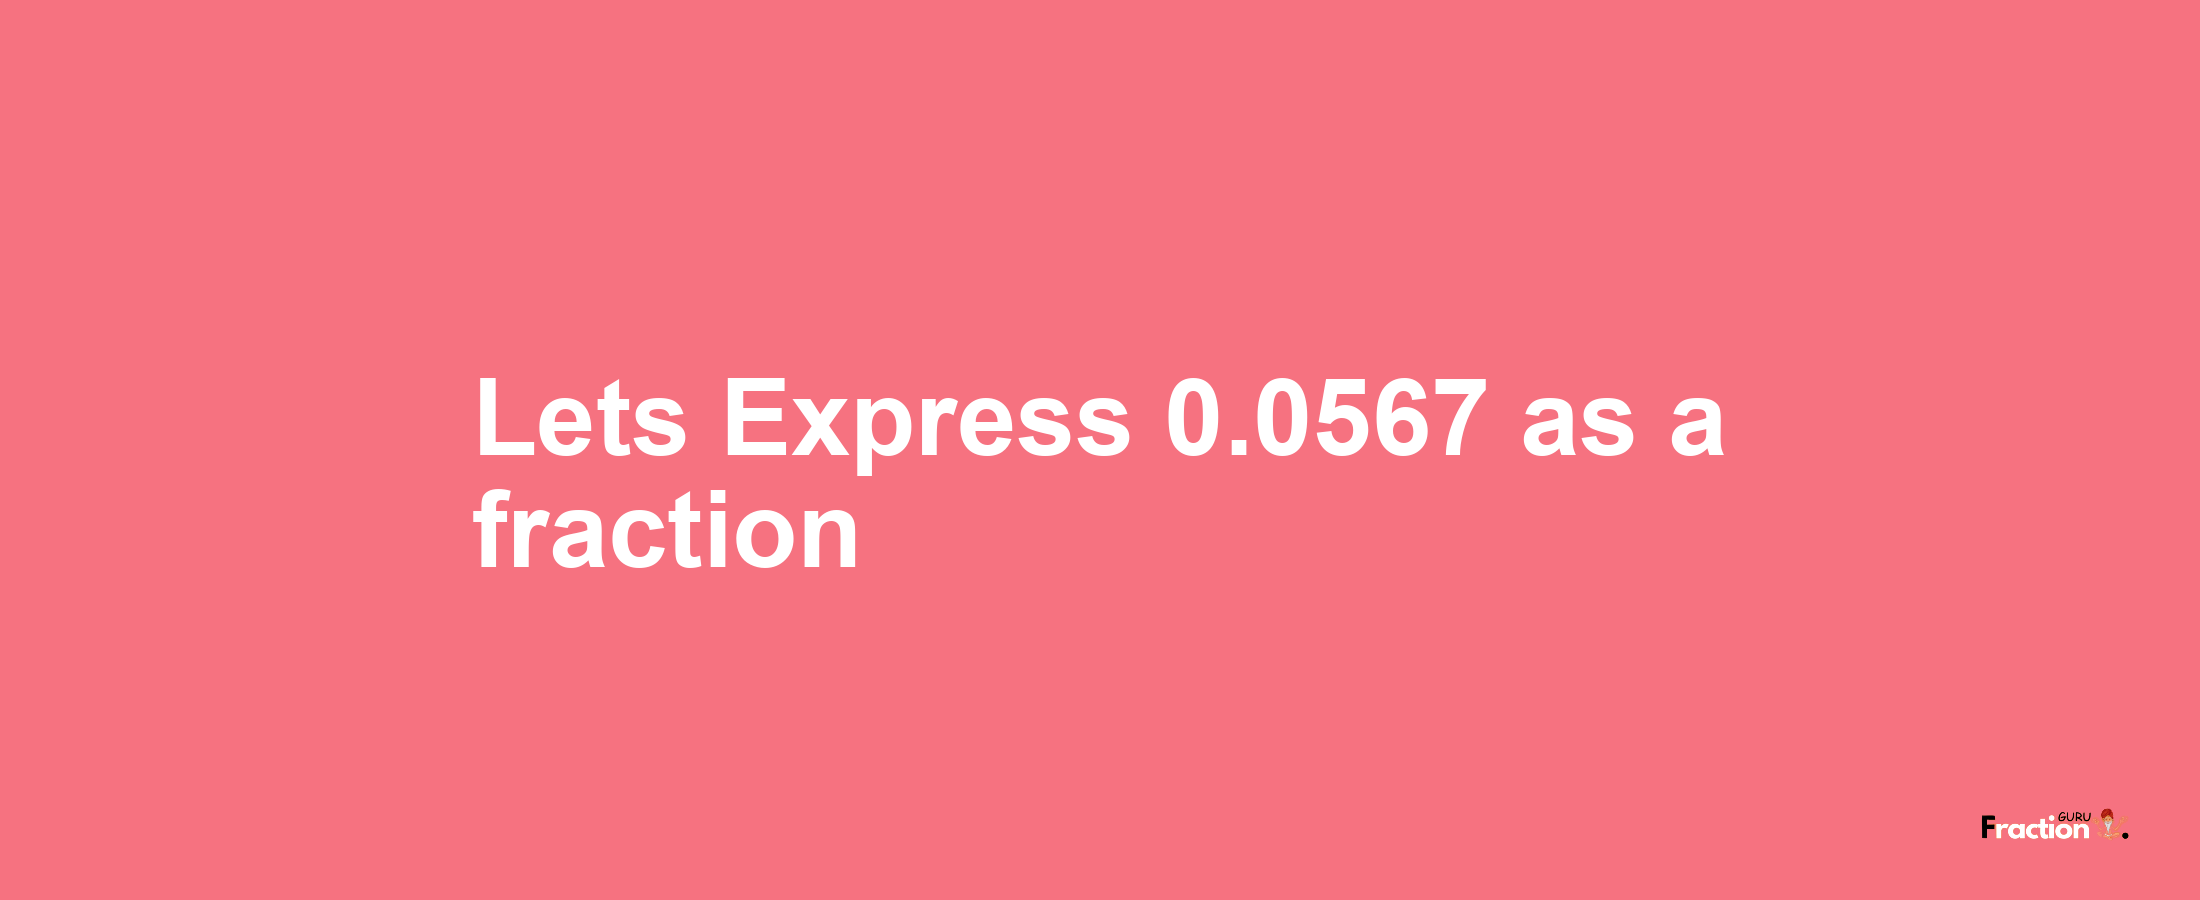 Lets Express 0.0567 as afraction